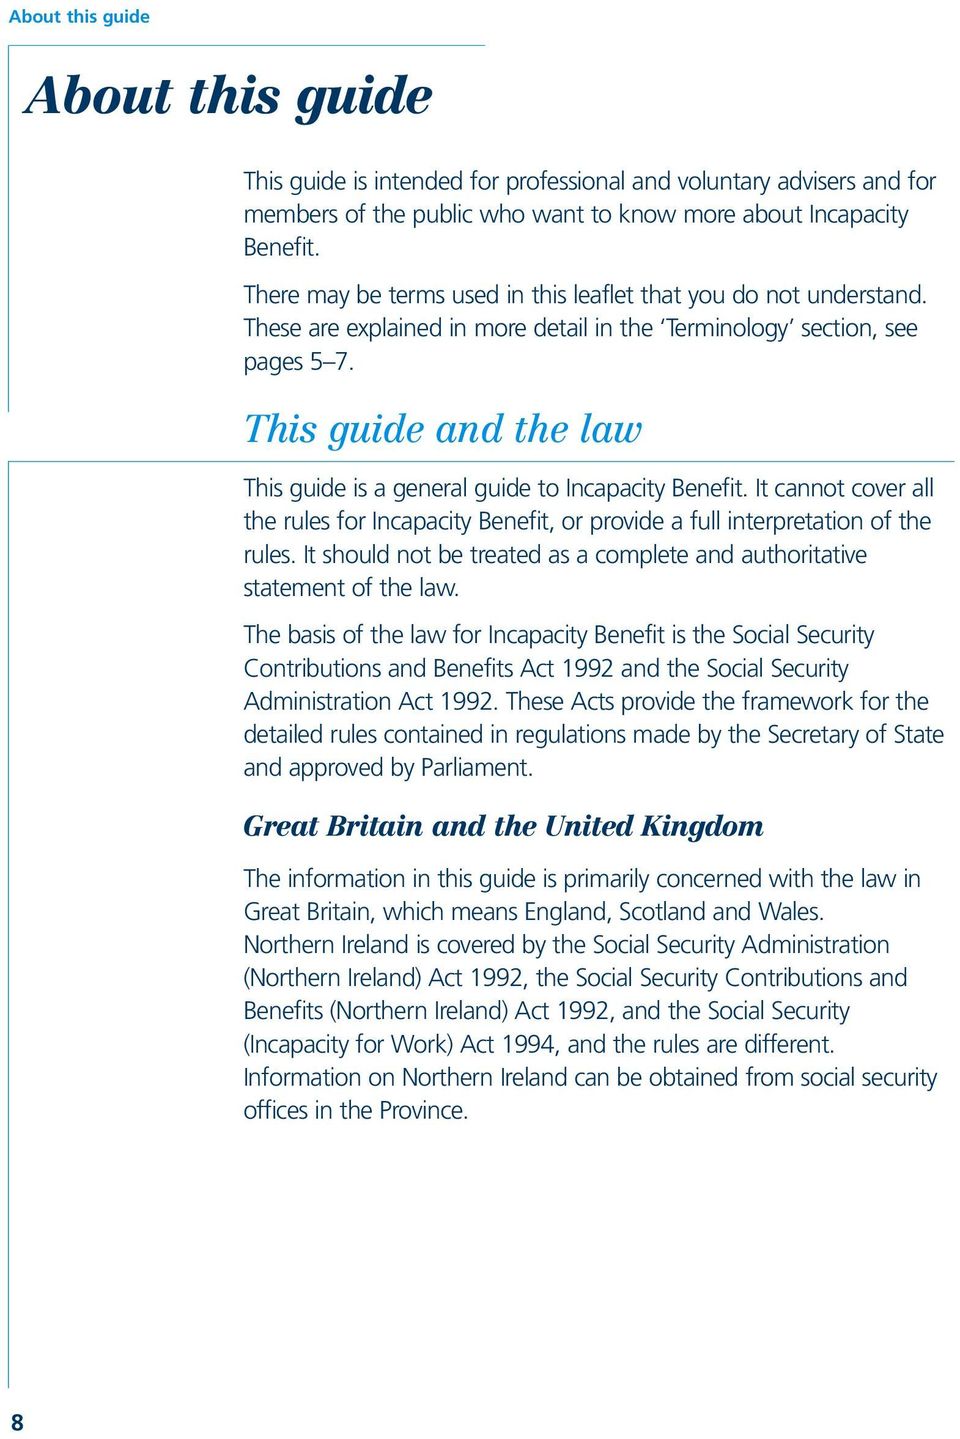 This guide and the law This guide is a general guide to Incapacity Benefit. It cannot cover all the rules for Incapacity Benefit, or provide a full interpretation of the rules.